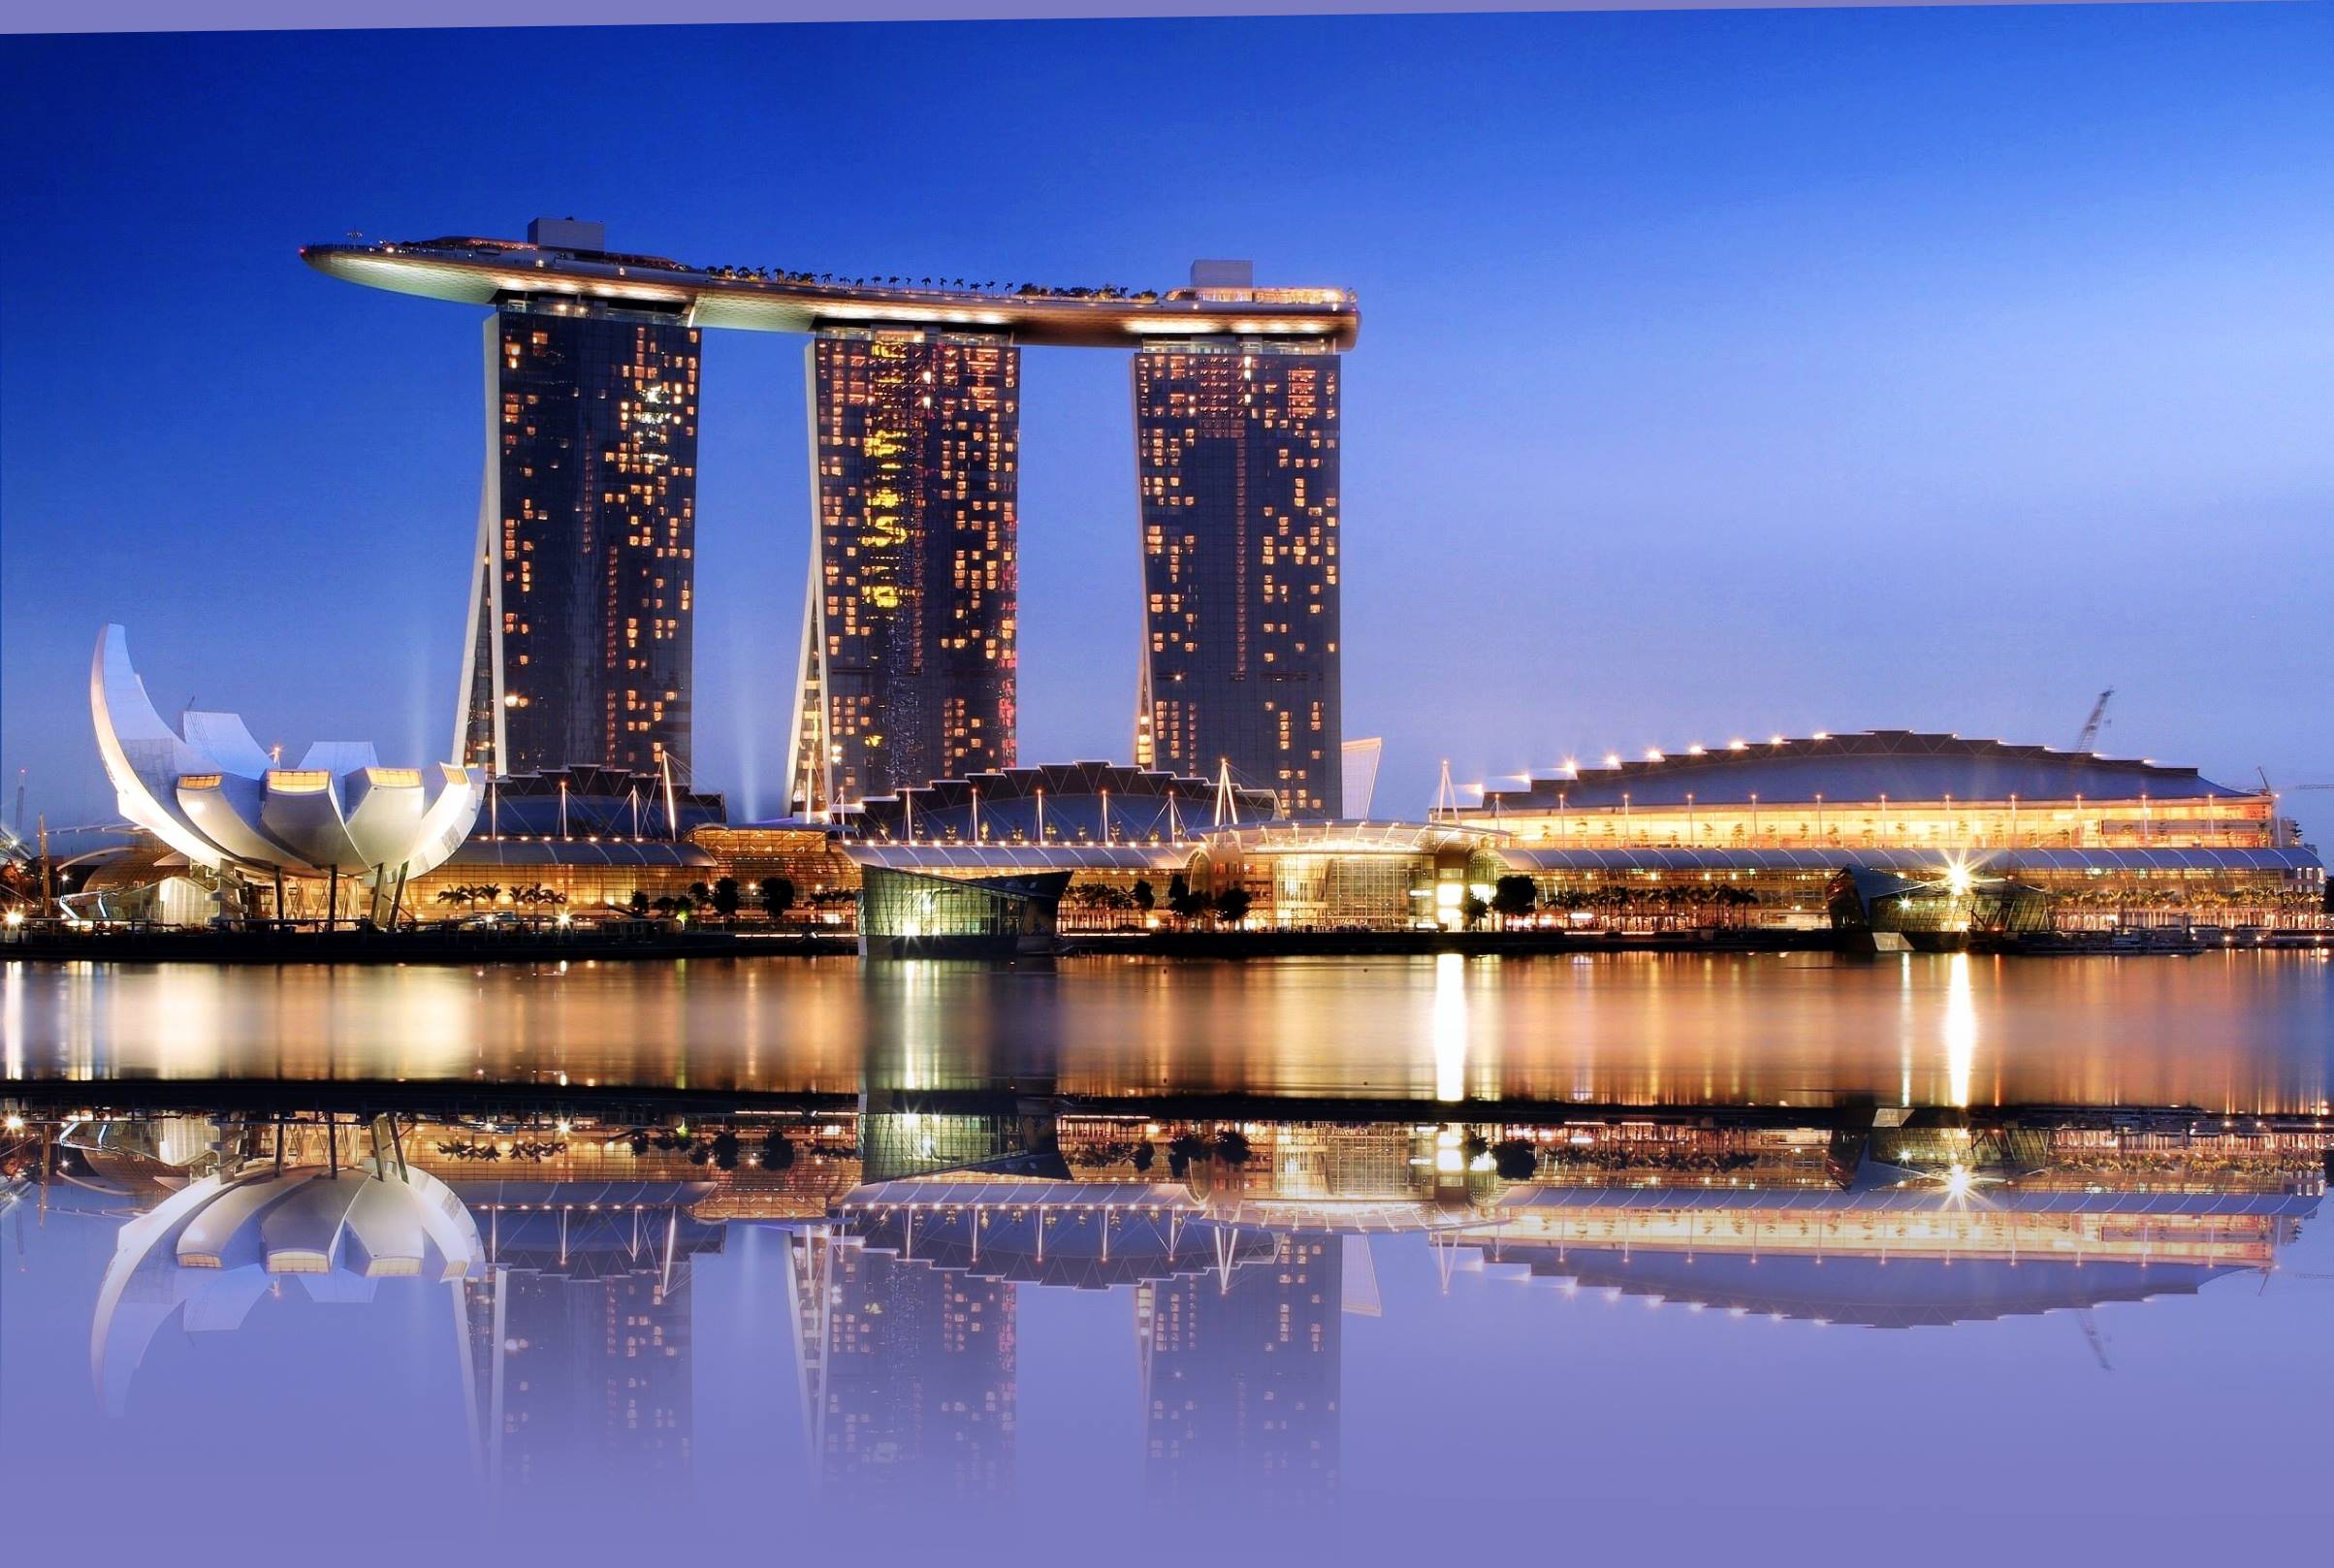 Marina Bay Sands has become a symbol and new landmark for Singapore 